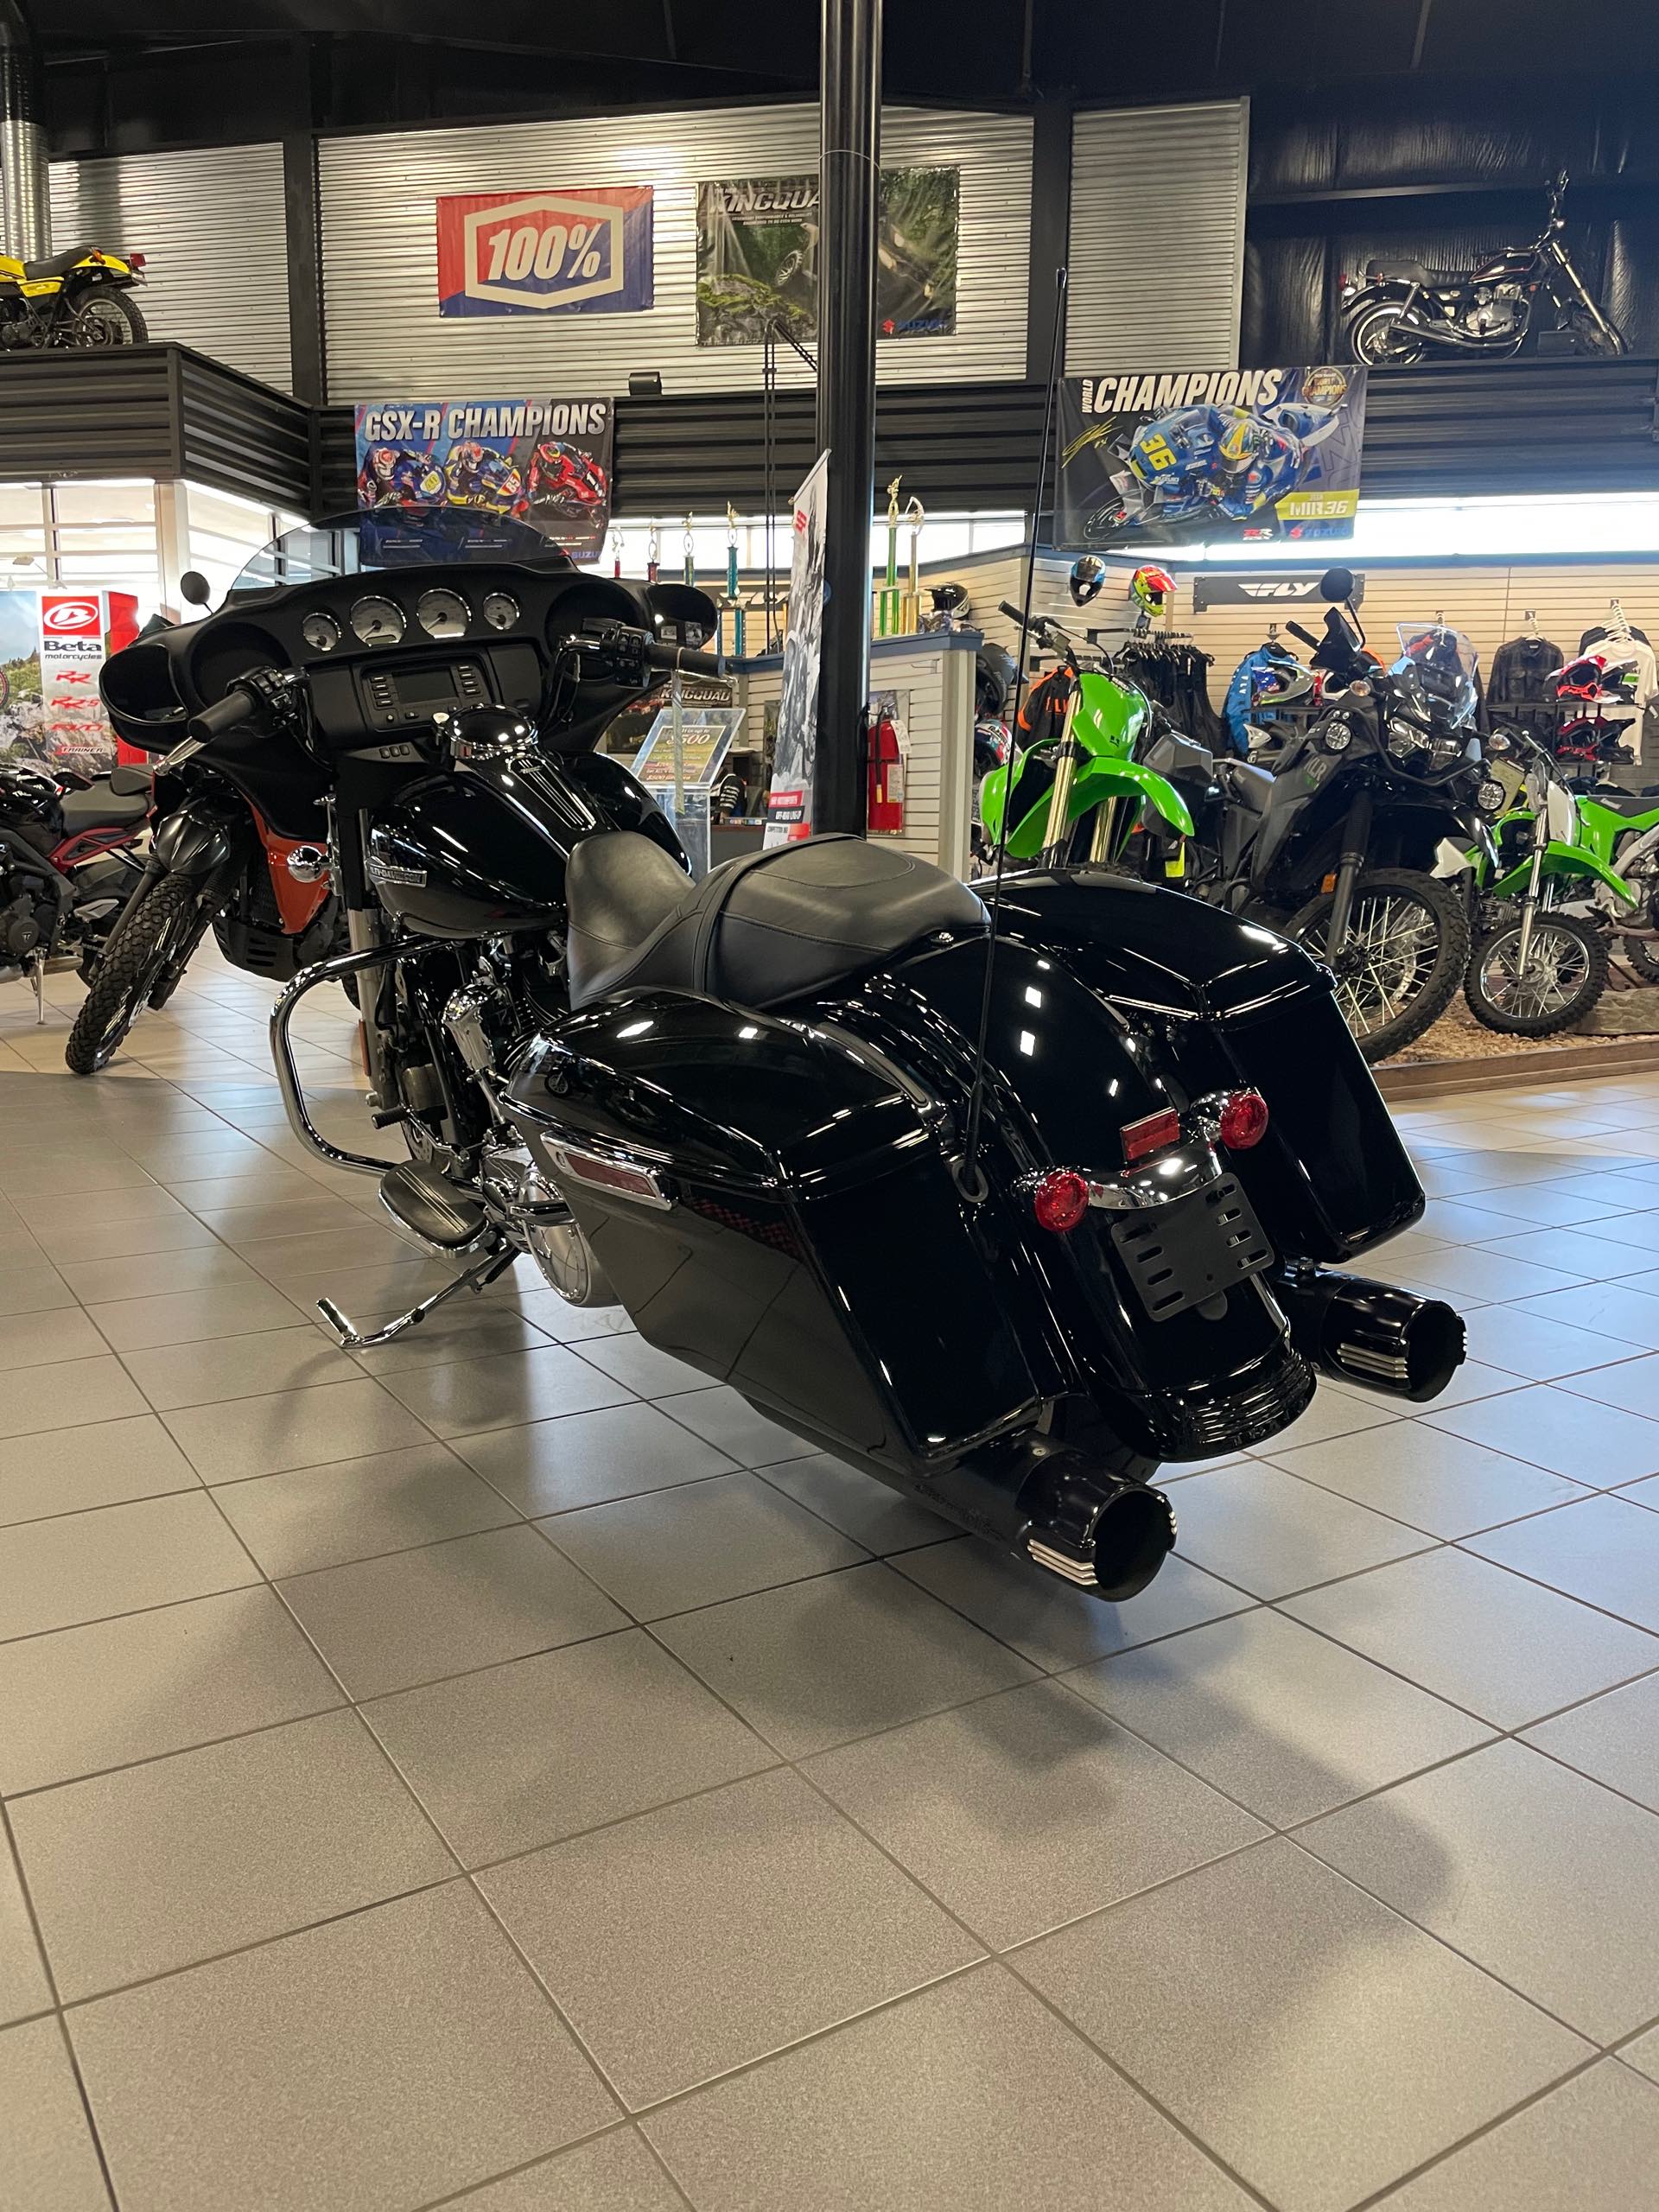 2021 Harley-Davidson Grand American Touring Street Glide at Rod's Ride On Powersports